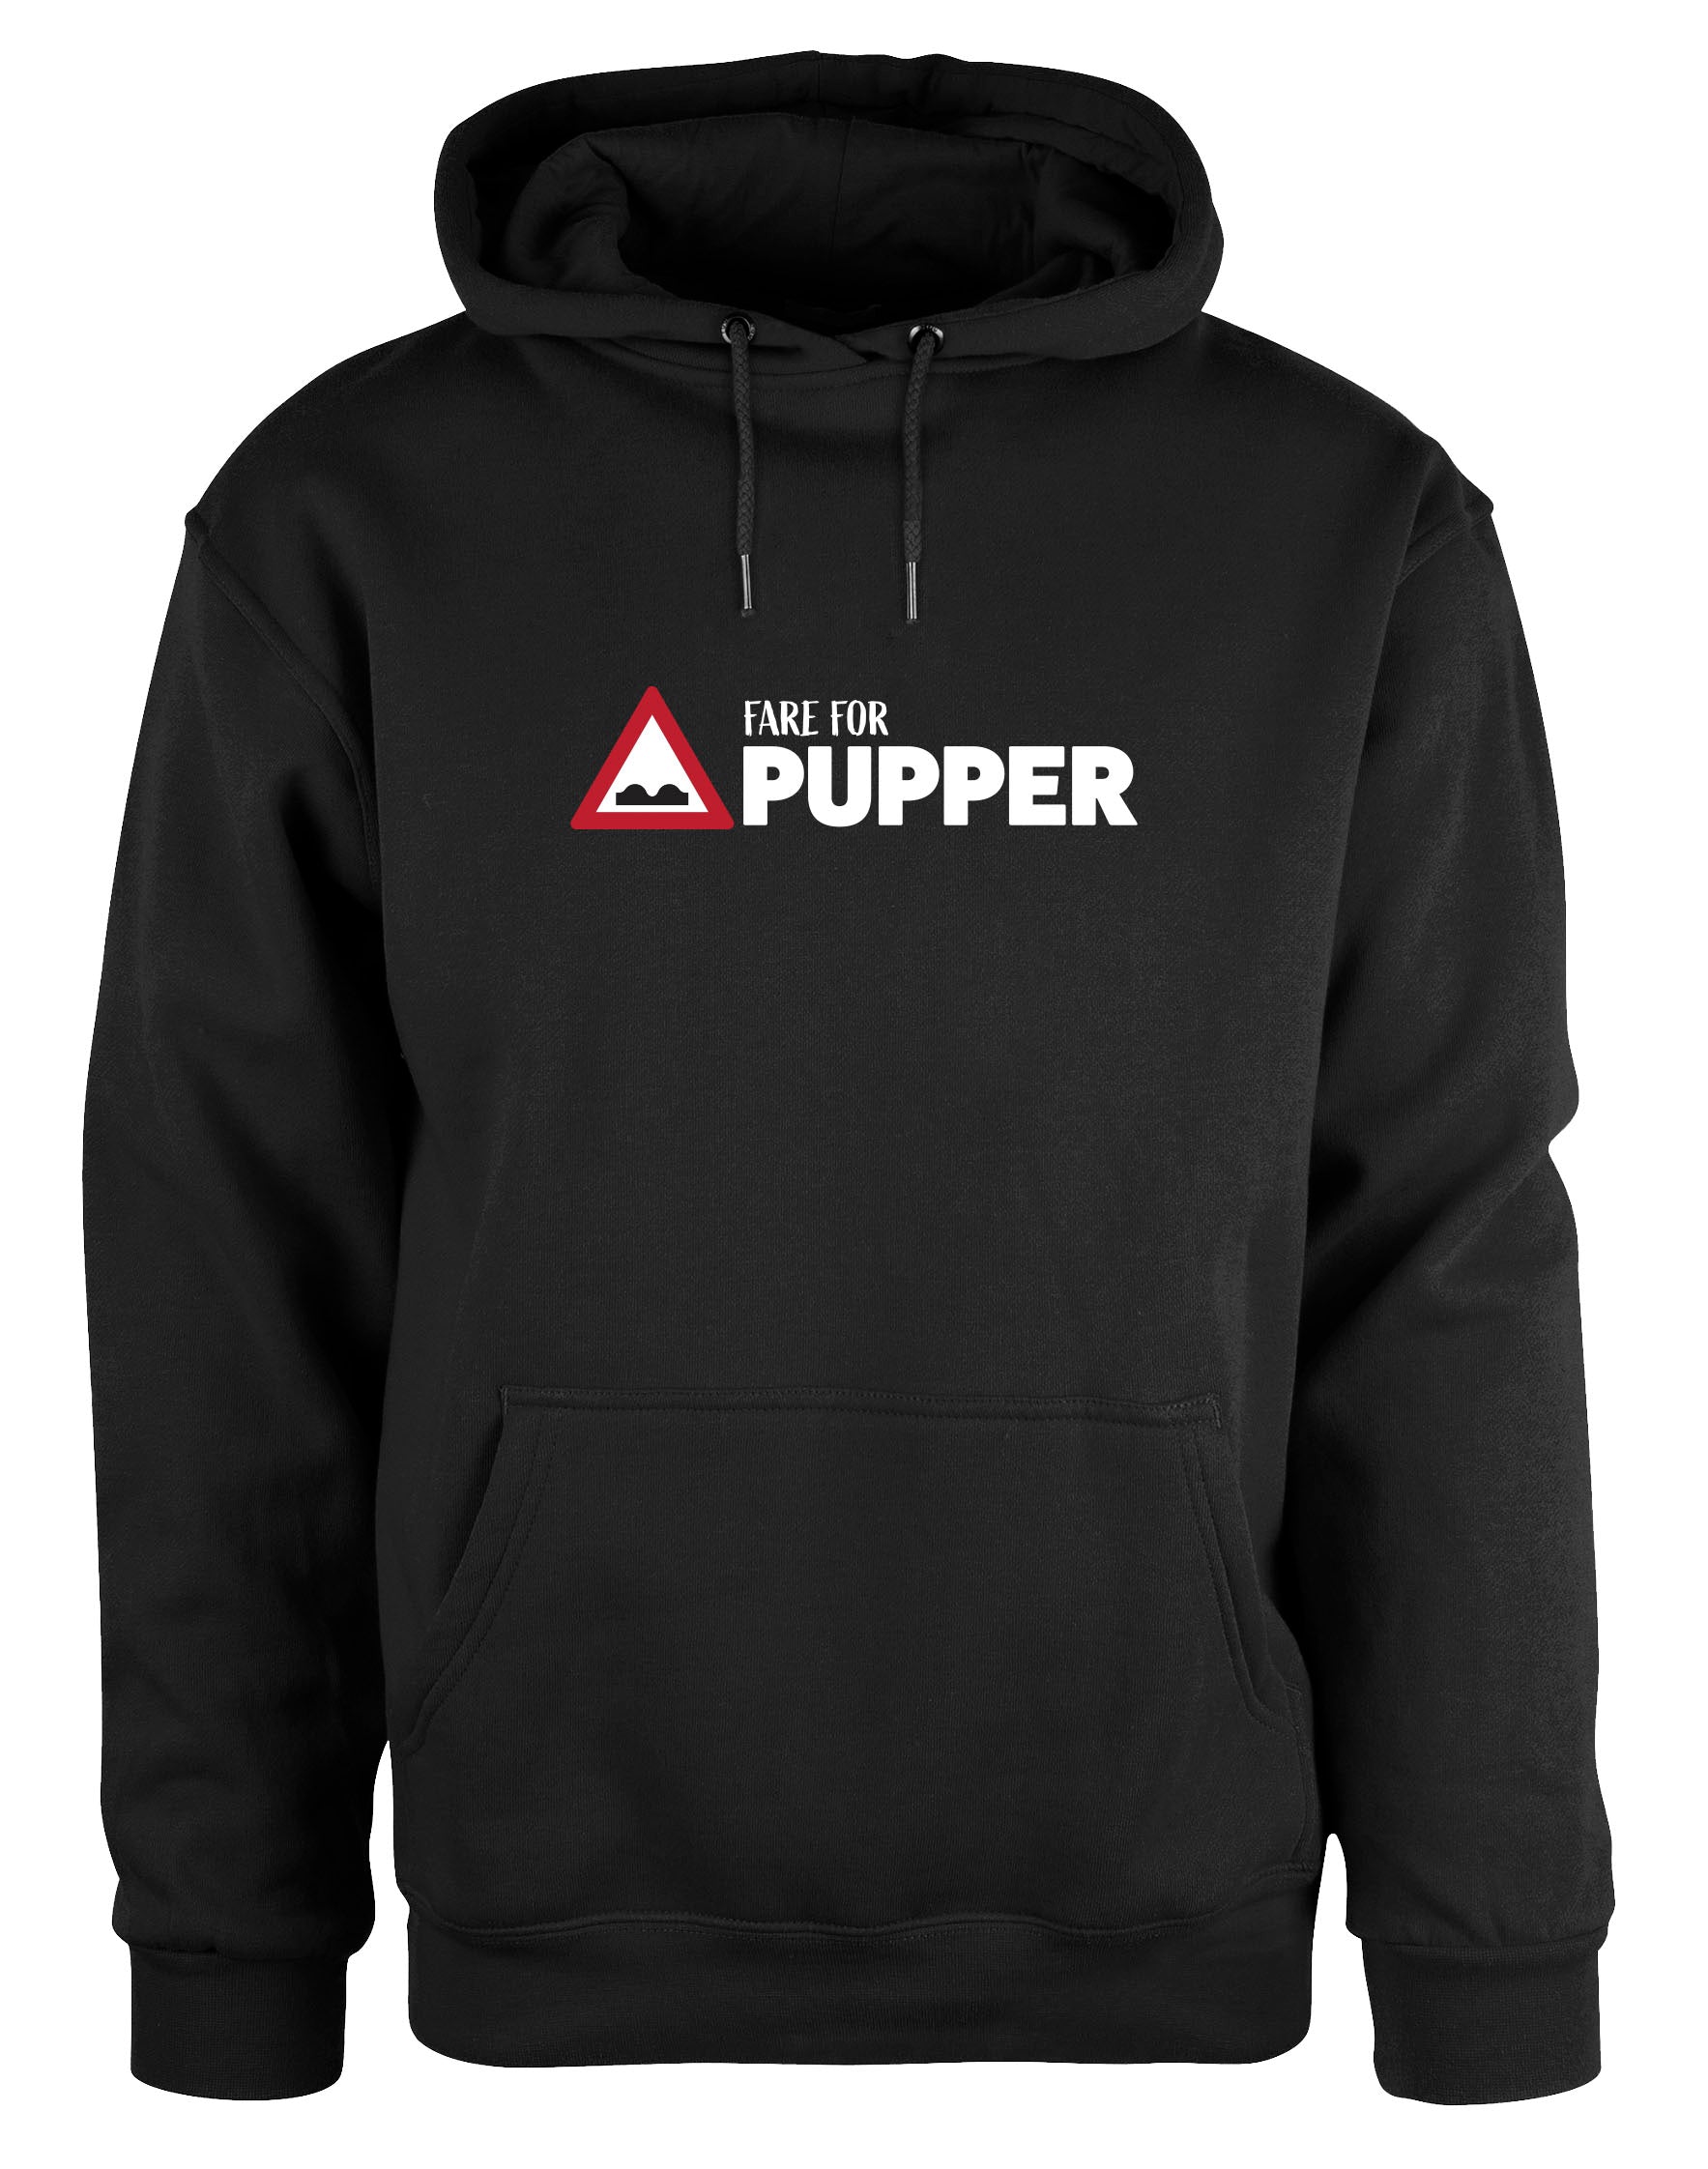 Fare for pupper hoodie